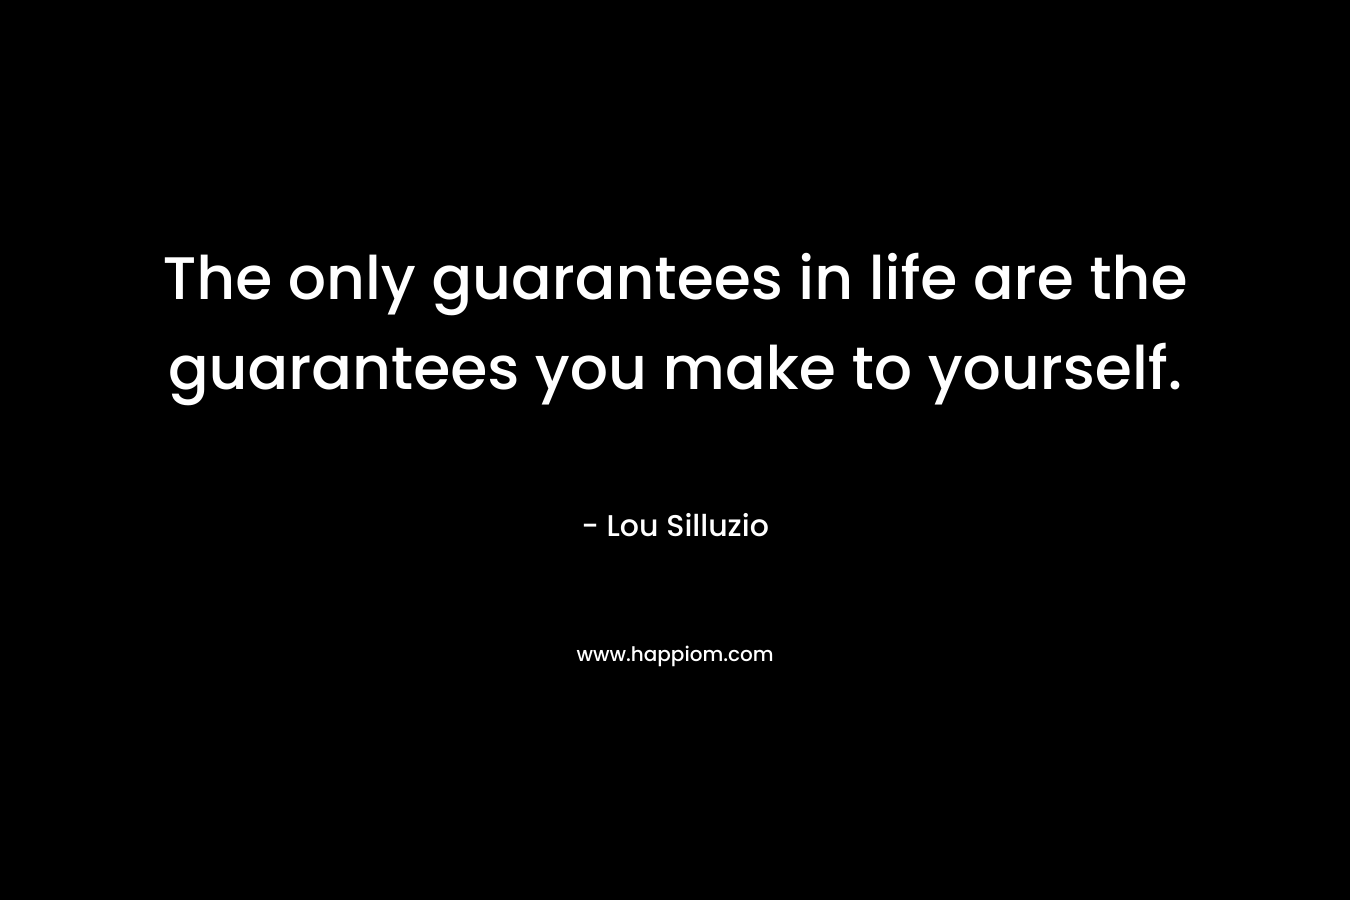 The only guarantees in life are the guarantees you make to yourself.